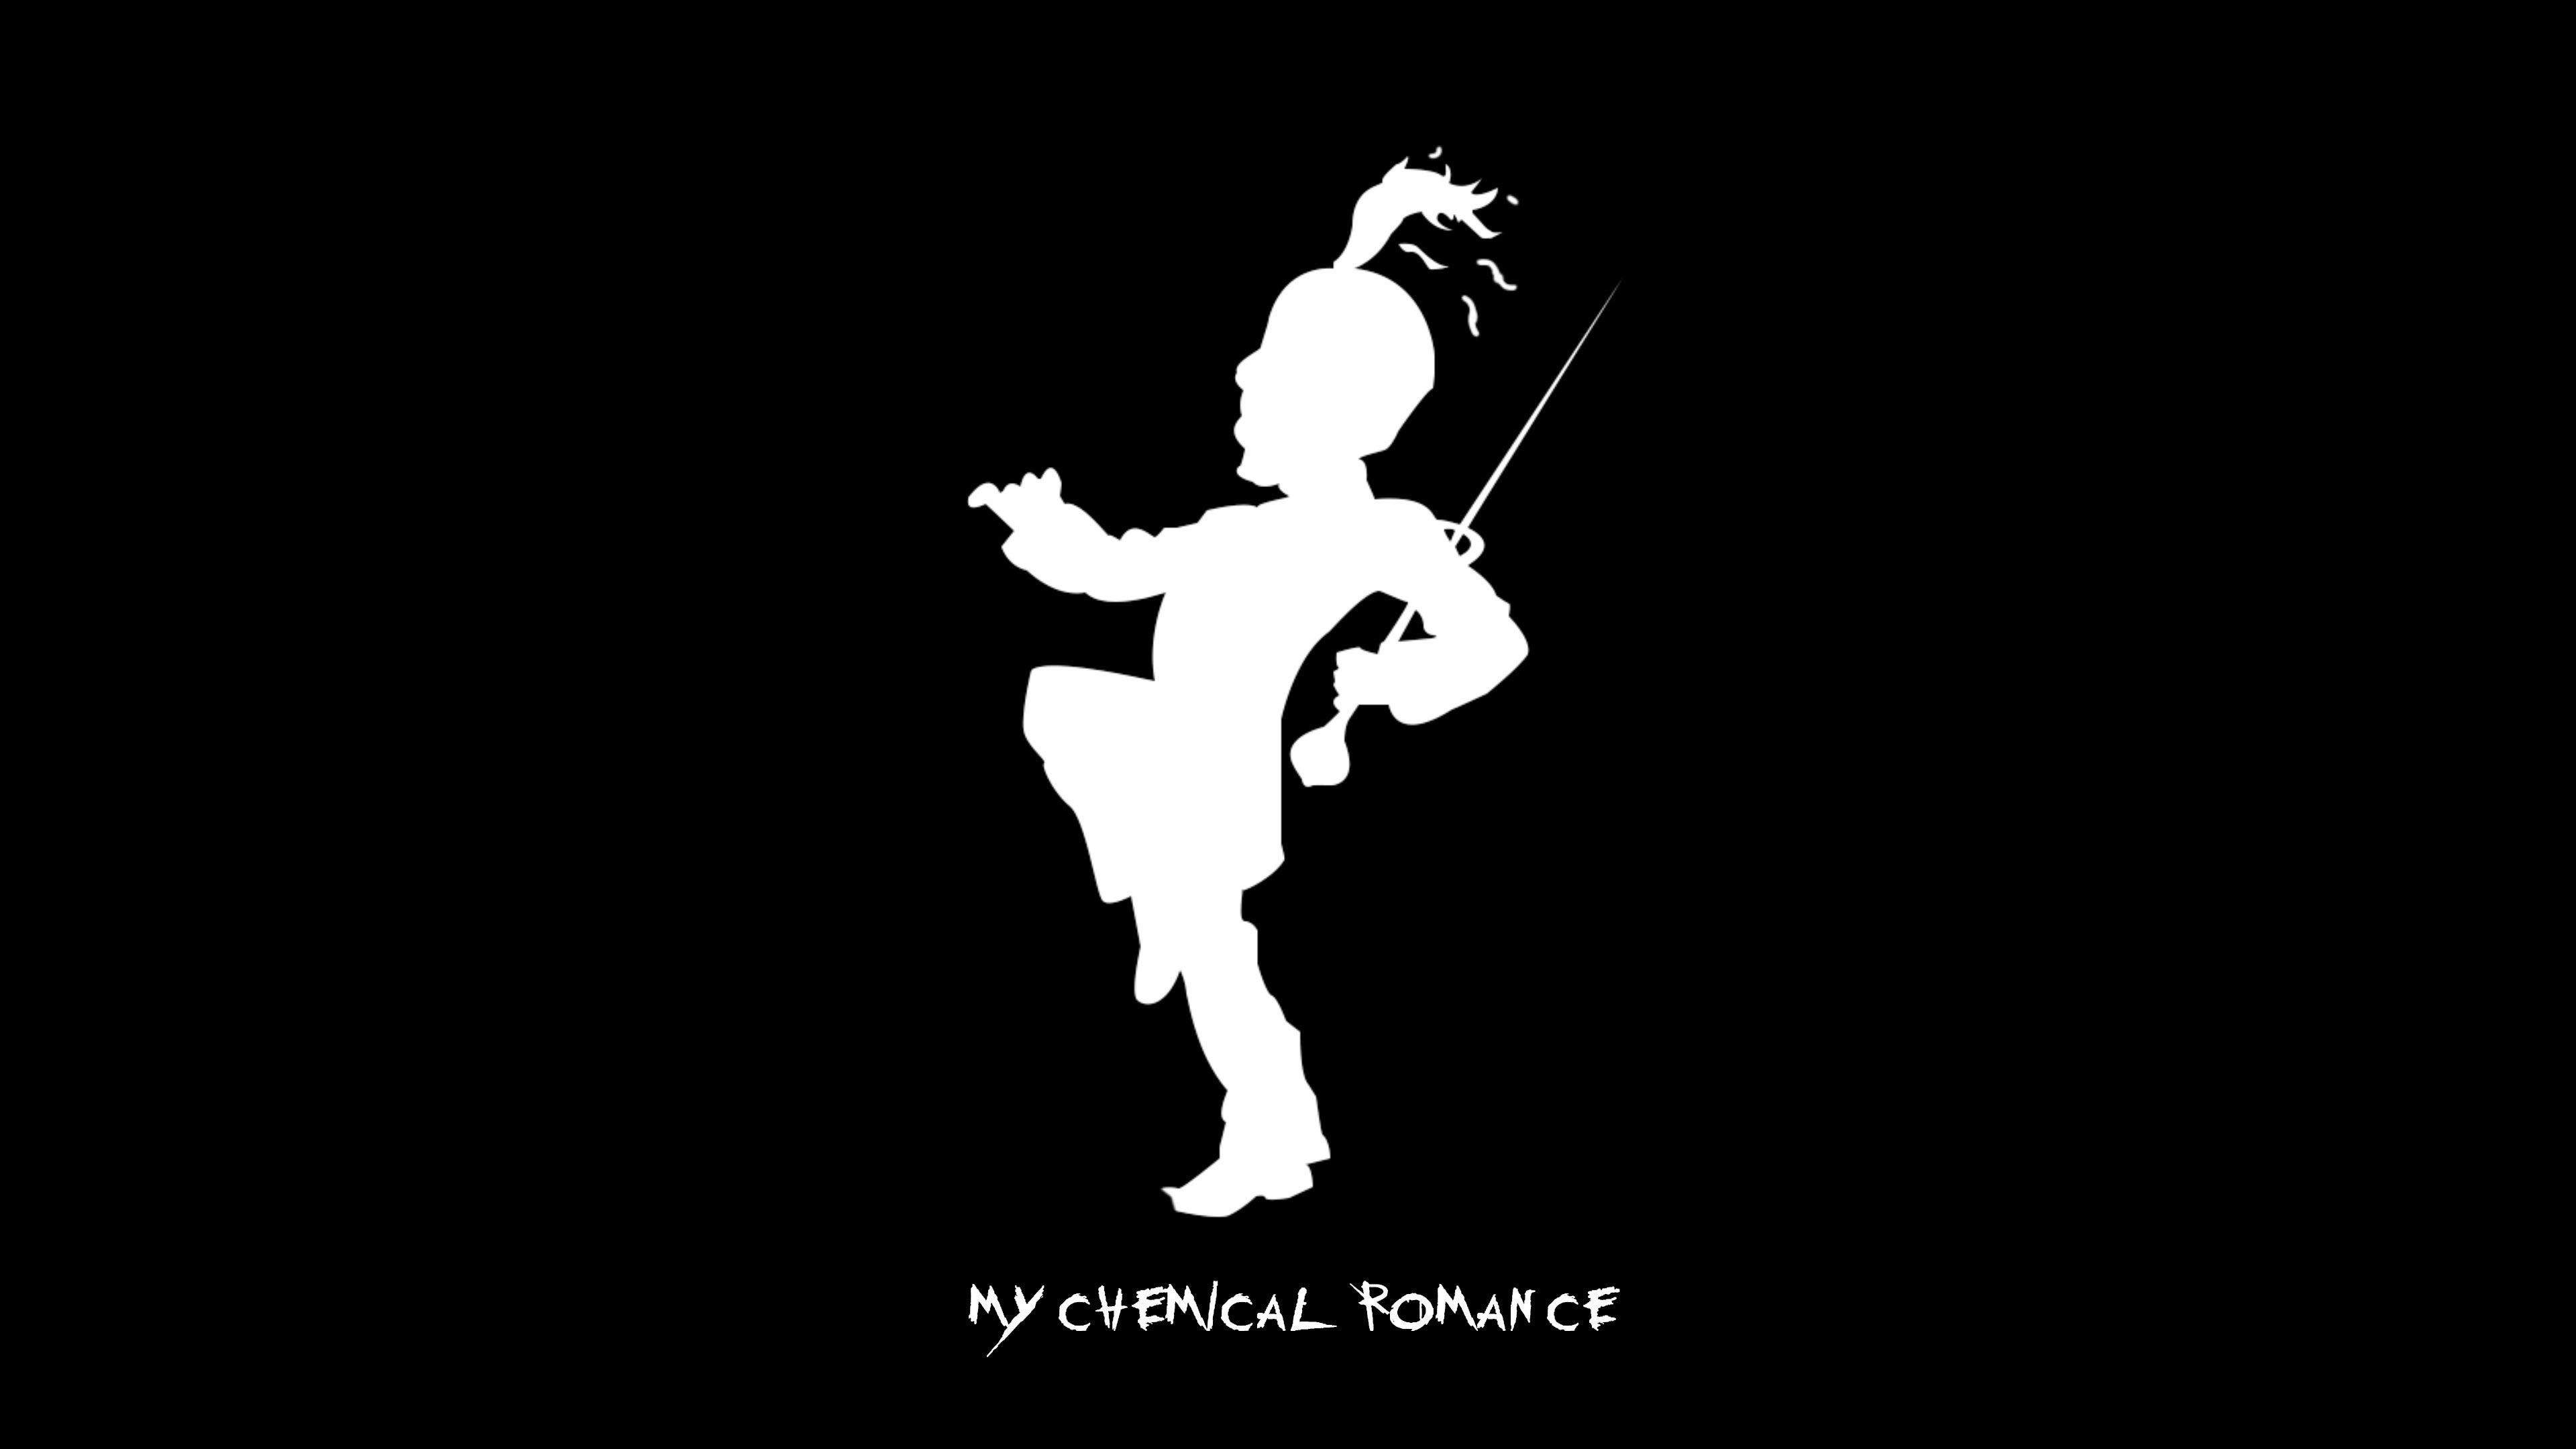 MCR (My Chemical Romance), The Black Parade wallpapers, Christopher Thompson's post, Band's magical journey, 3840x2160 4K Desktop